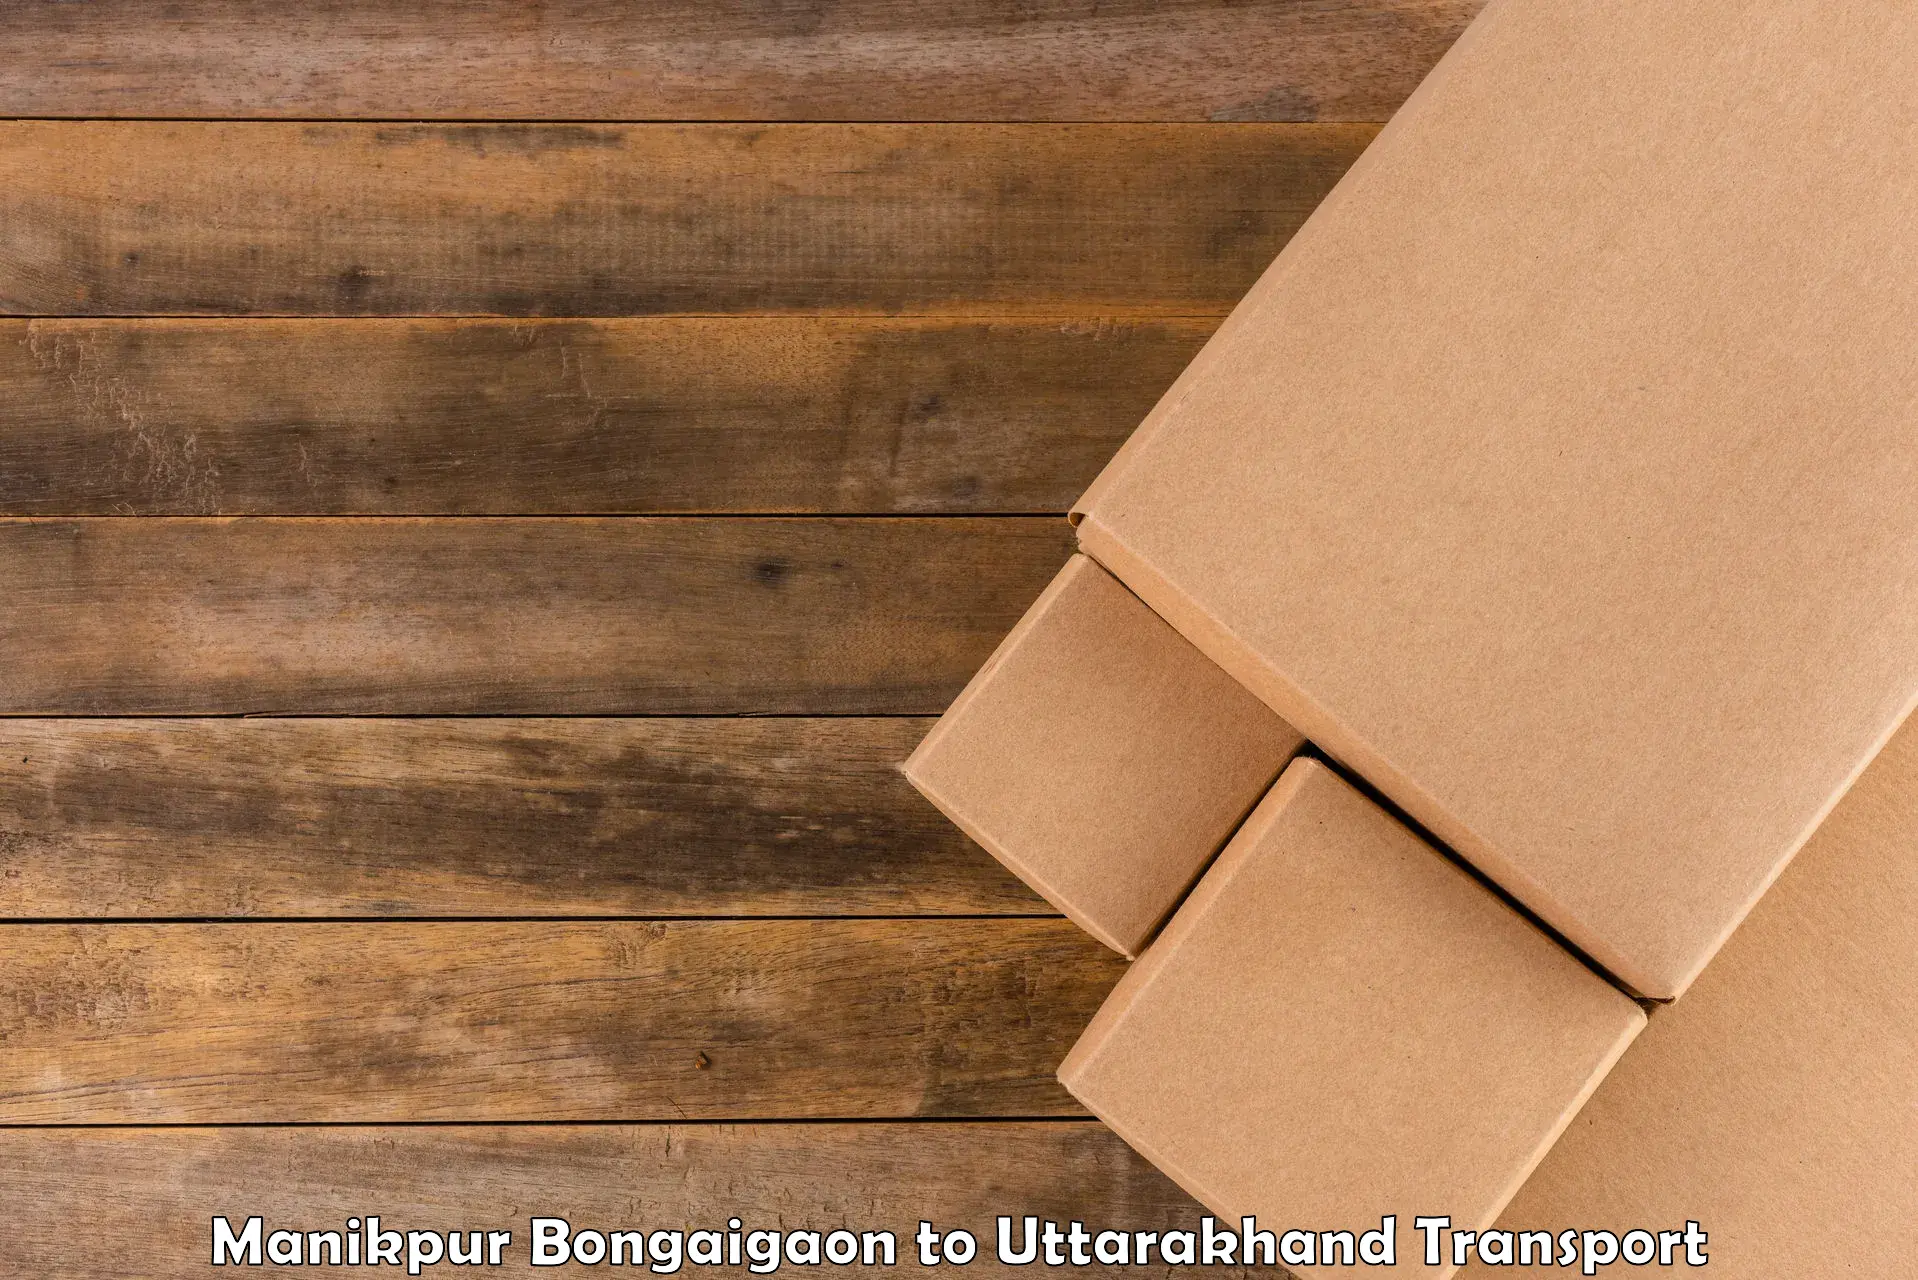 Container transport service in Manikpur Bongaigaon to Rudrapur